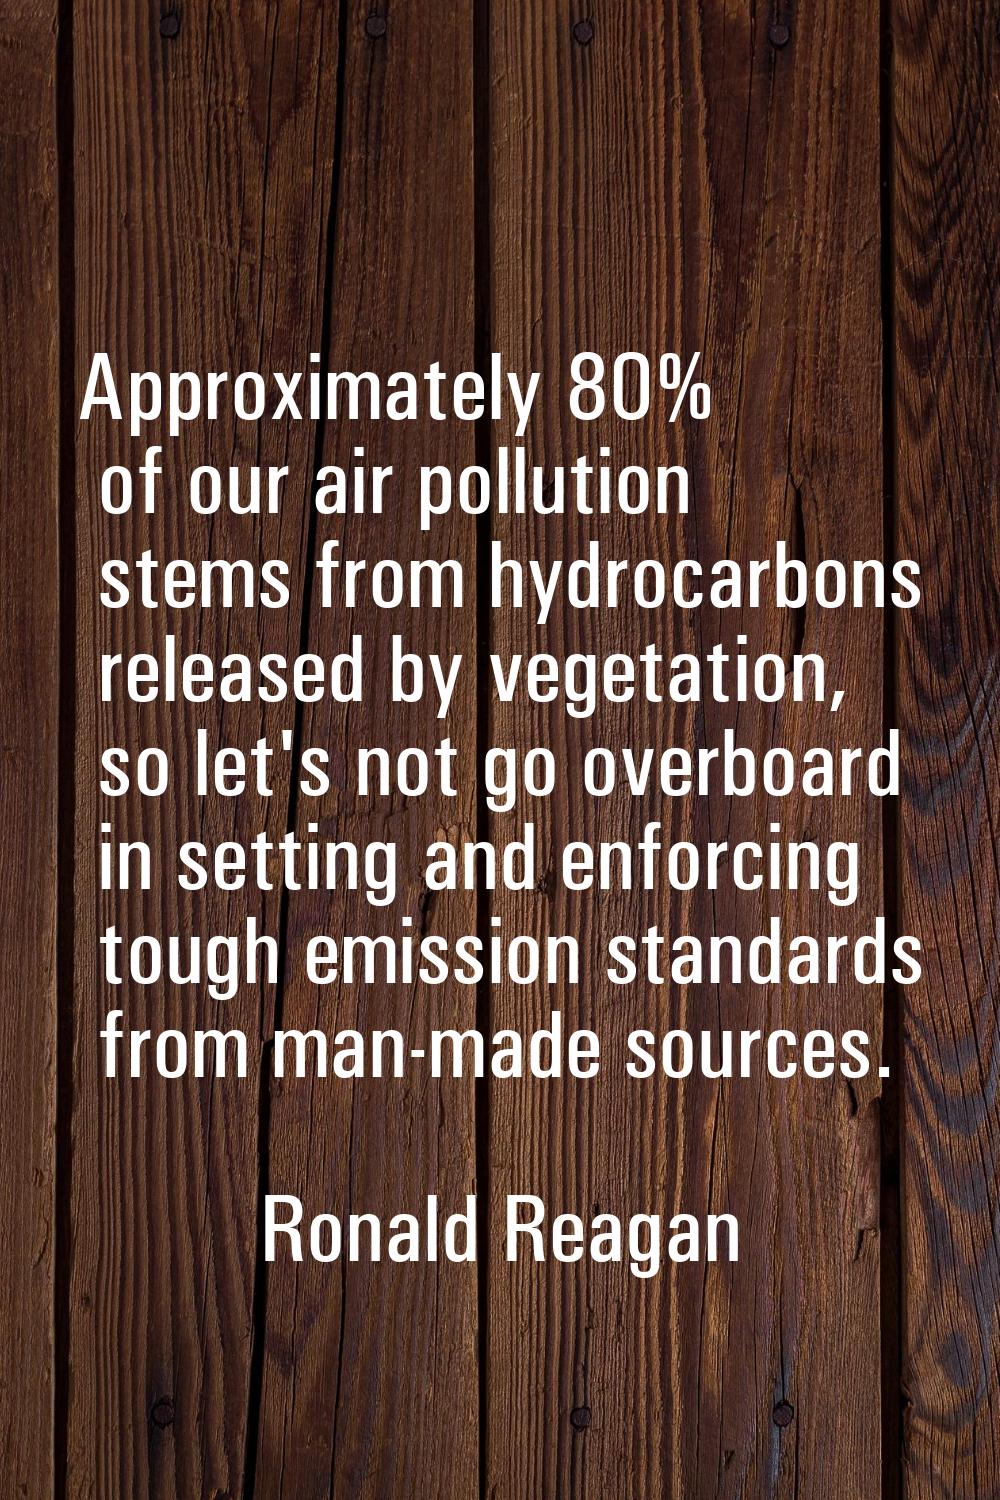 Approximately 80% of our air pollution stems from hydrocarbons released by vegetation, so let's not